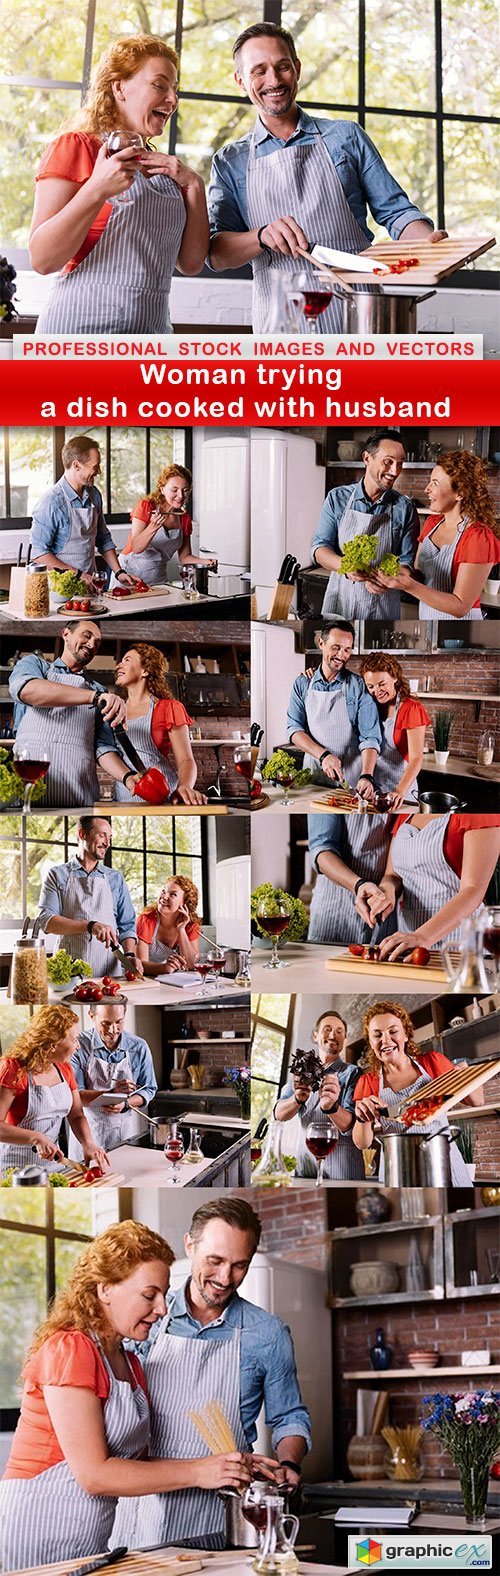 Woman trying a dish cooked with husband - 10 UHQ JPEG